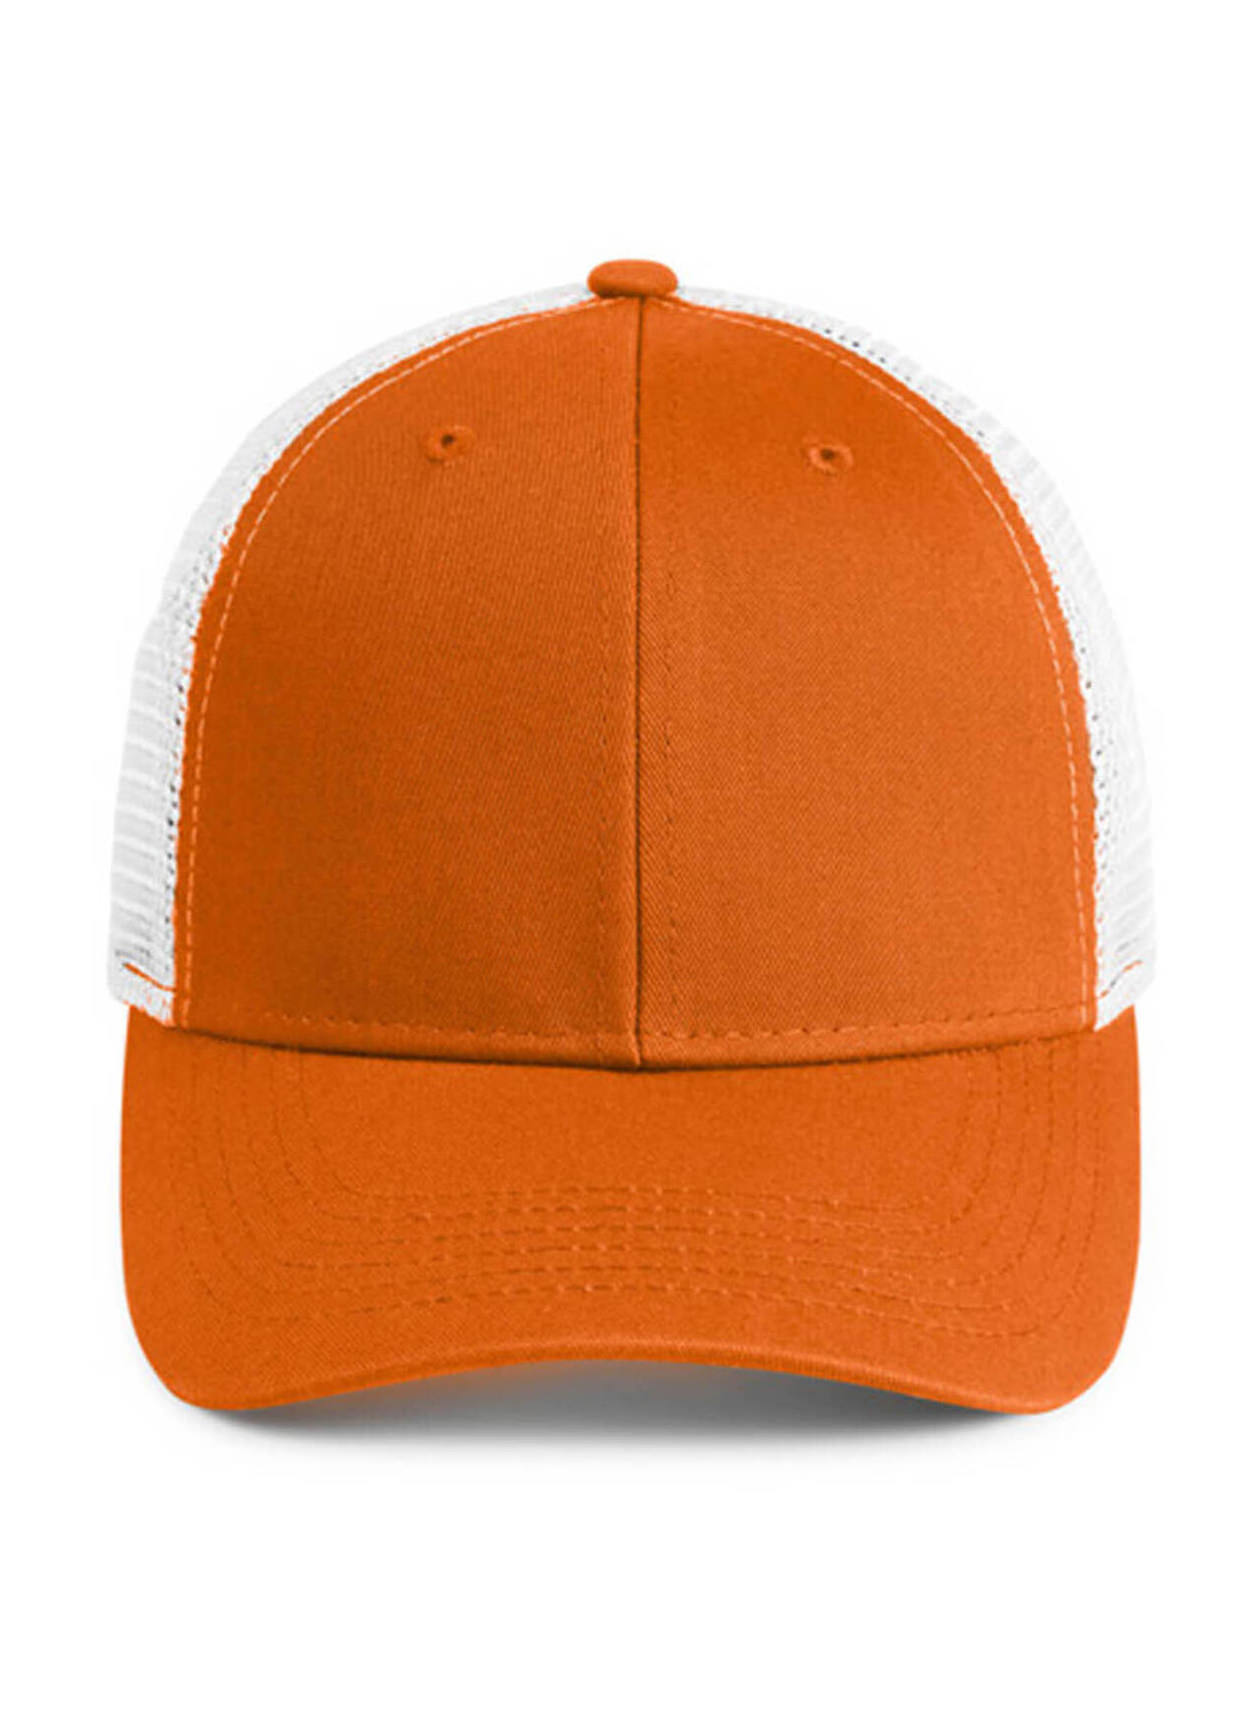 Imperial Orange / White The Catch & Release Hat Adjustable Meshback Hat